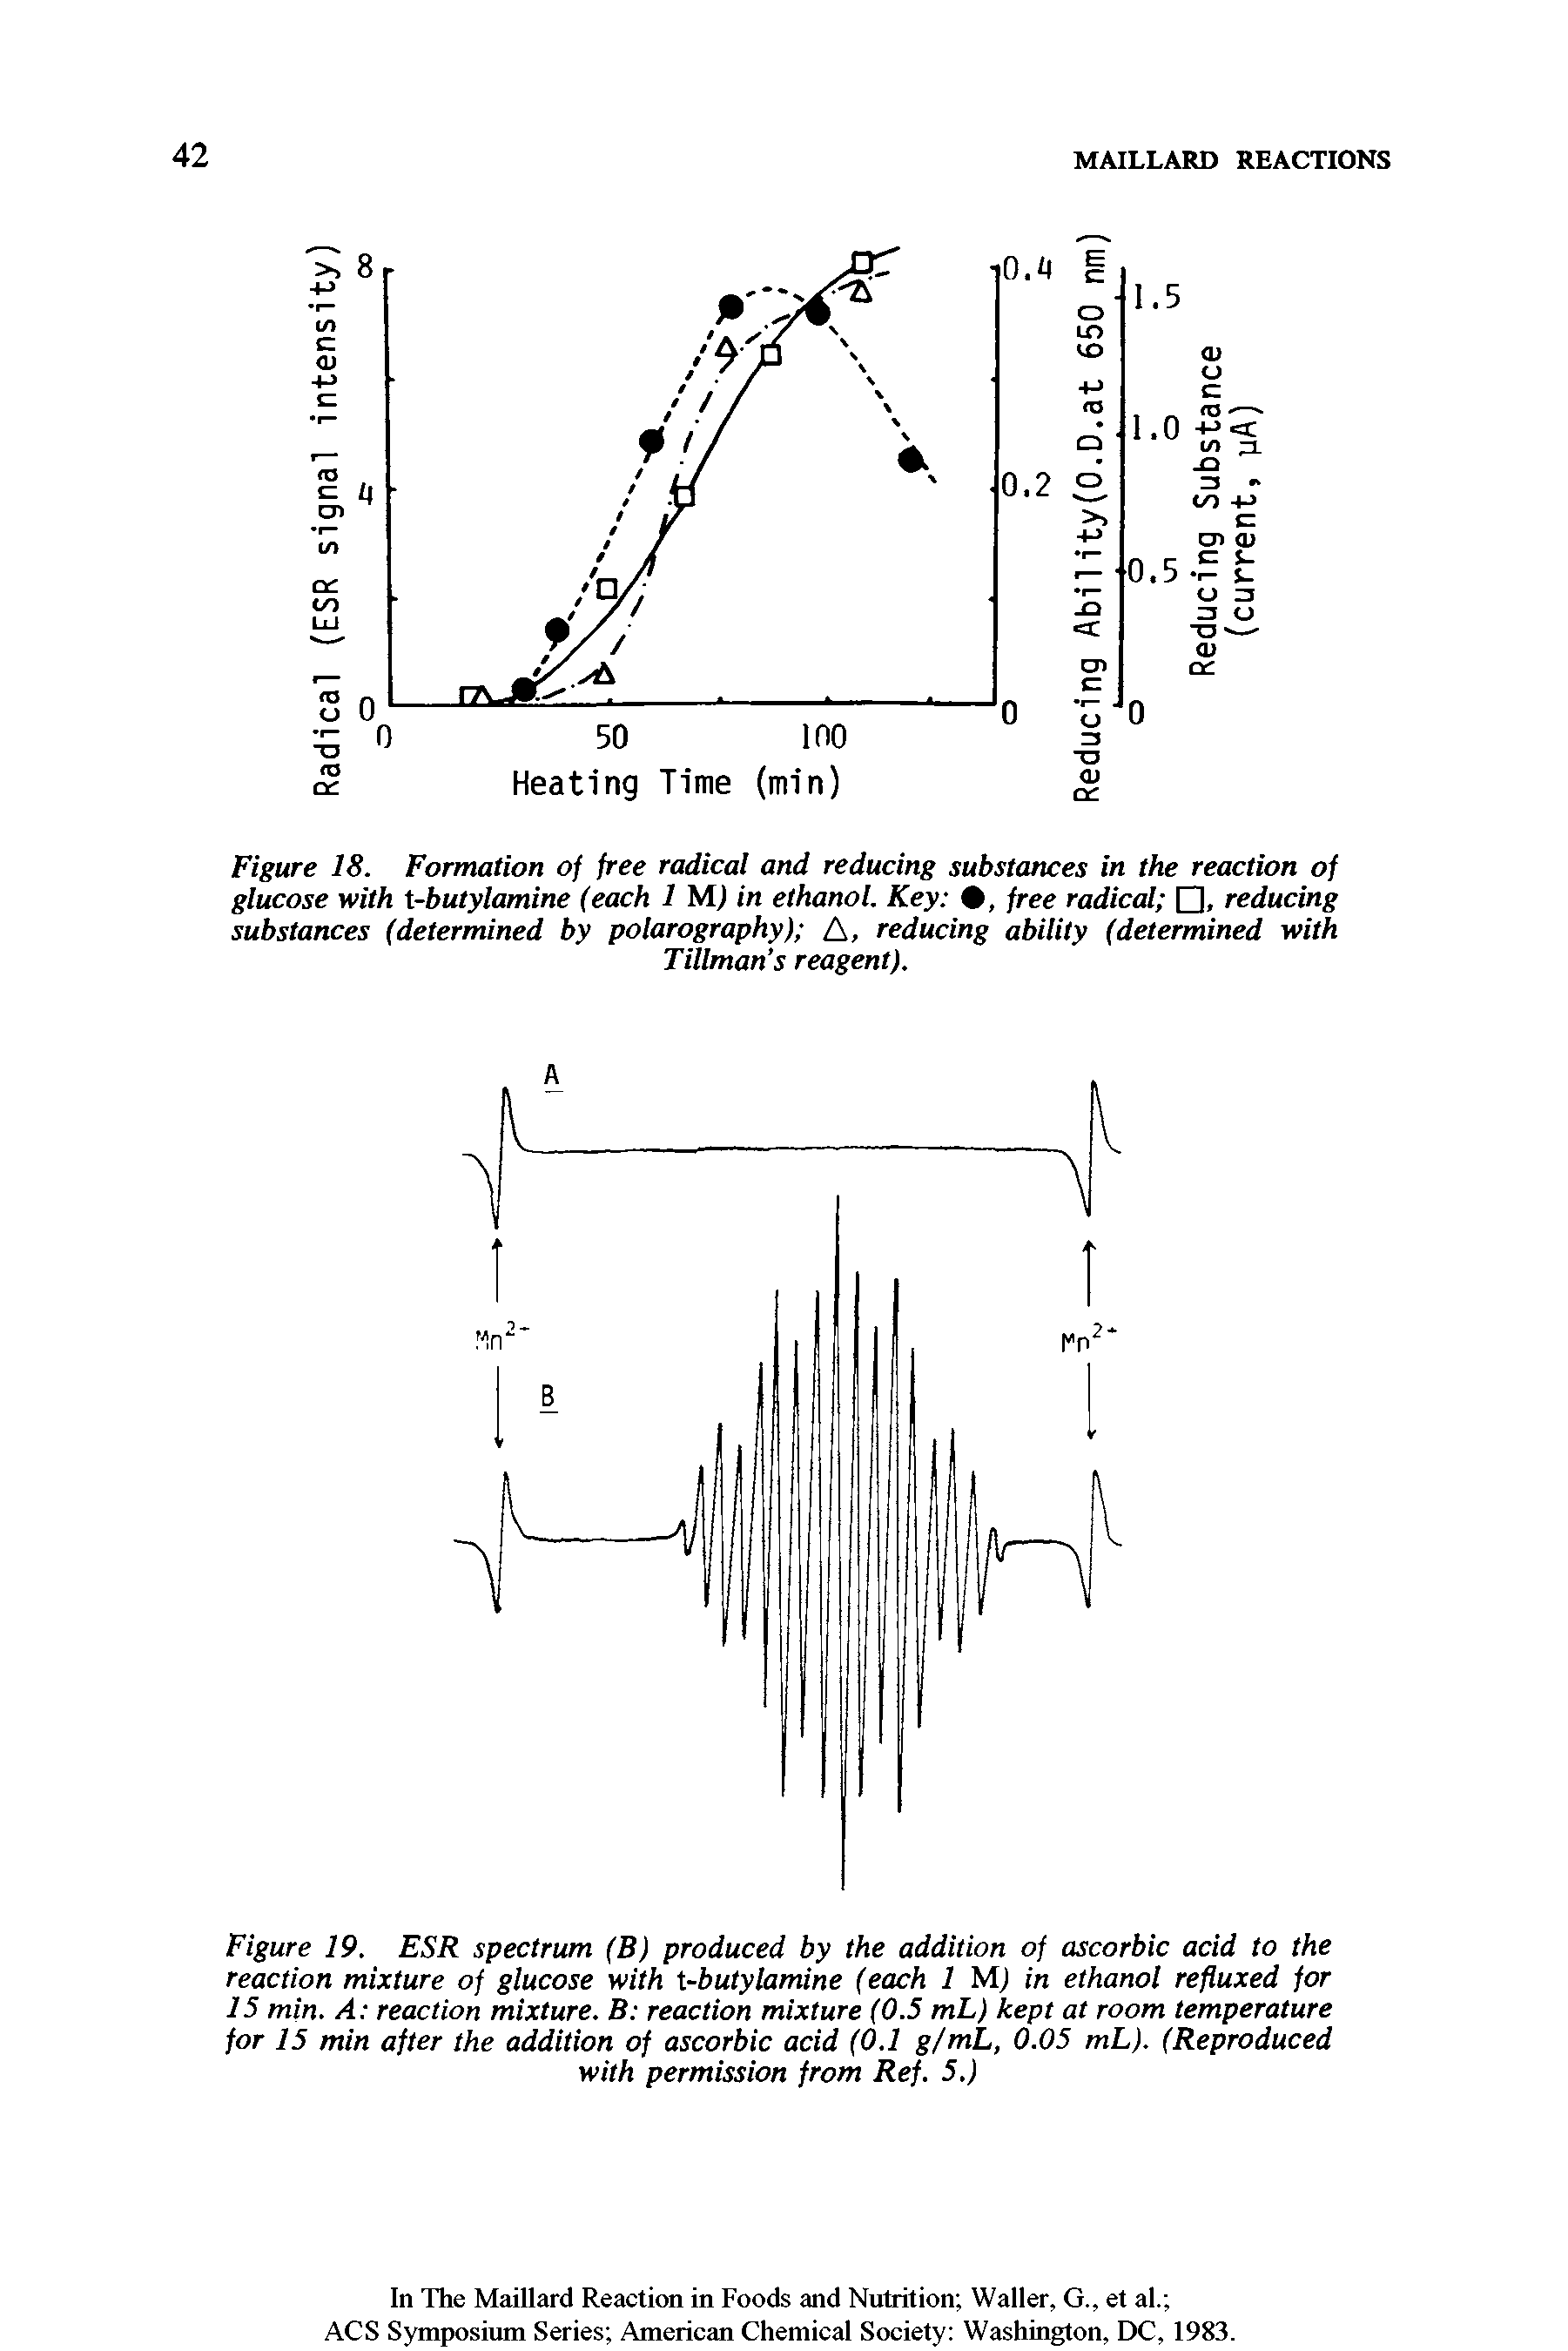 Figure 19. ESR spectrum (B) produced by the addition of ascorbic acid to the reaction mixture of glucose with X-butylamine (each 1 MJ in ethanol refluxed for 15 min. A reaction mixture. B reaction mixture (0.5 mL) kept at room temperature for 15 min after the addition of ascorbic acid (0.1 g/mL, 0.05 mL). (Reproduced with permission from Ref. 5.)...